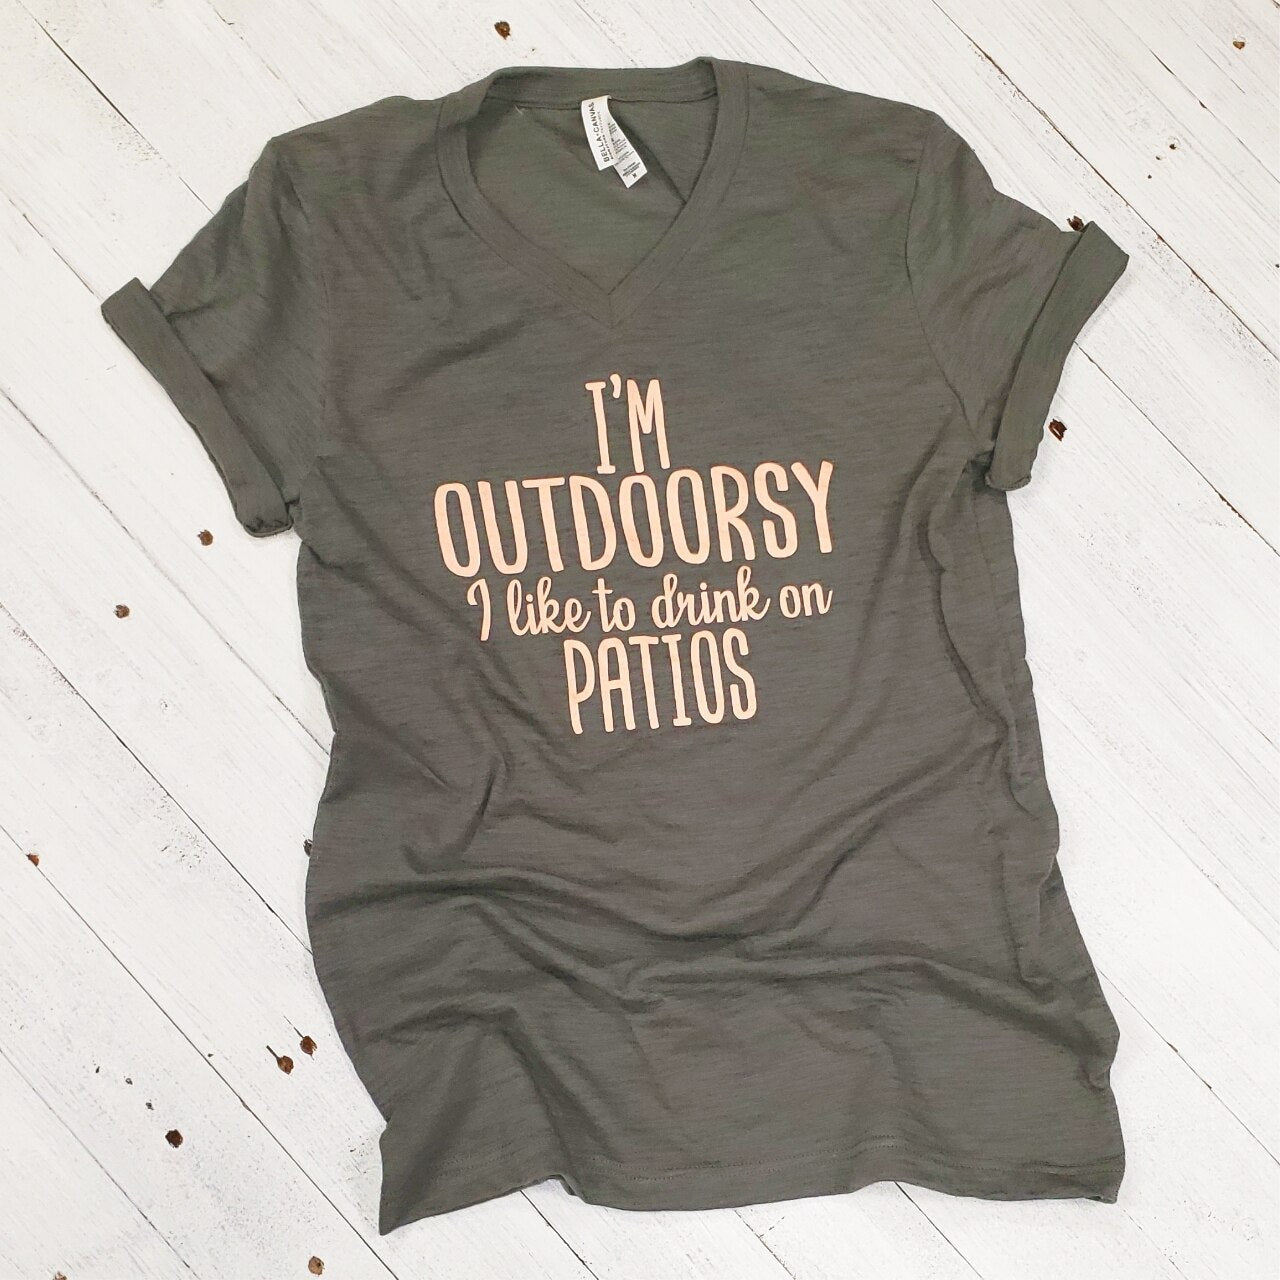 I'm Outdoorsy, I Like to Drink on Patios - V-Neck Tee - The Graphic Tee